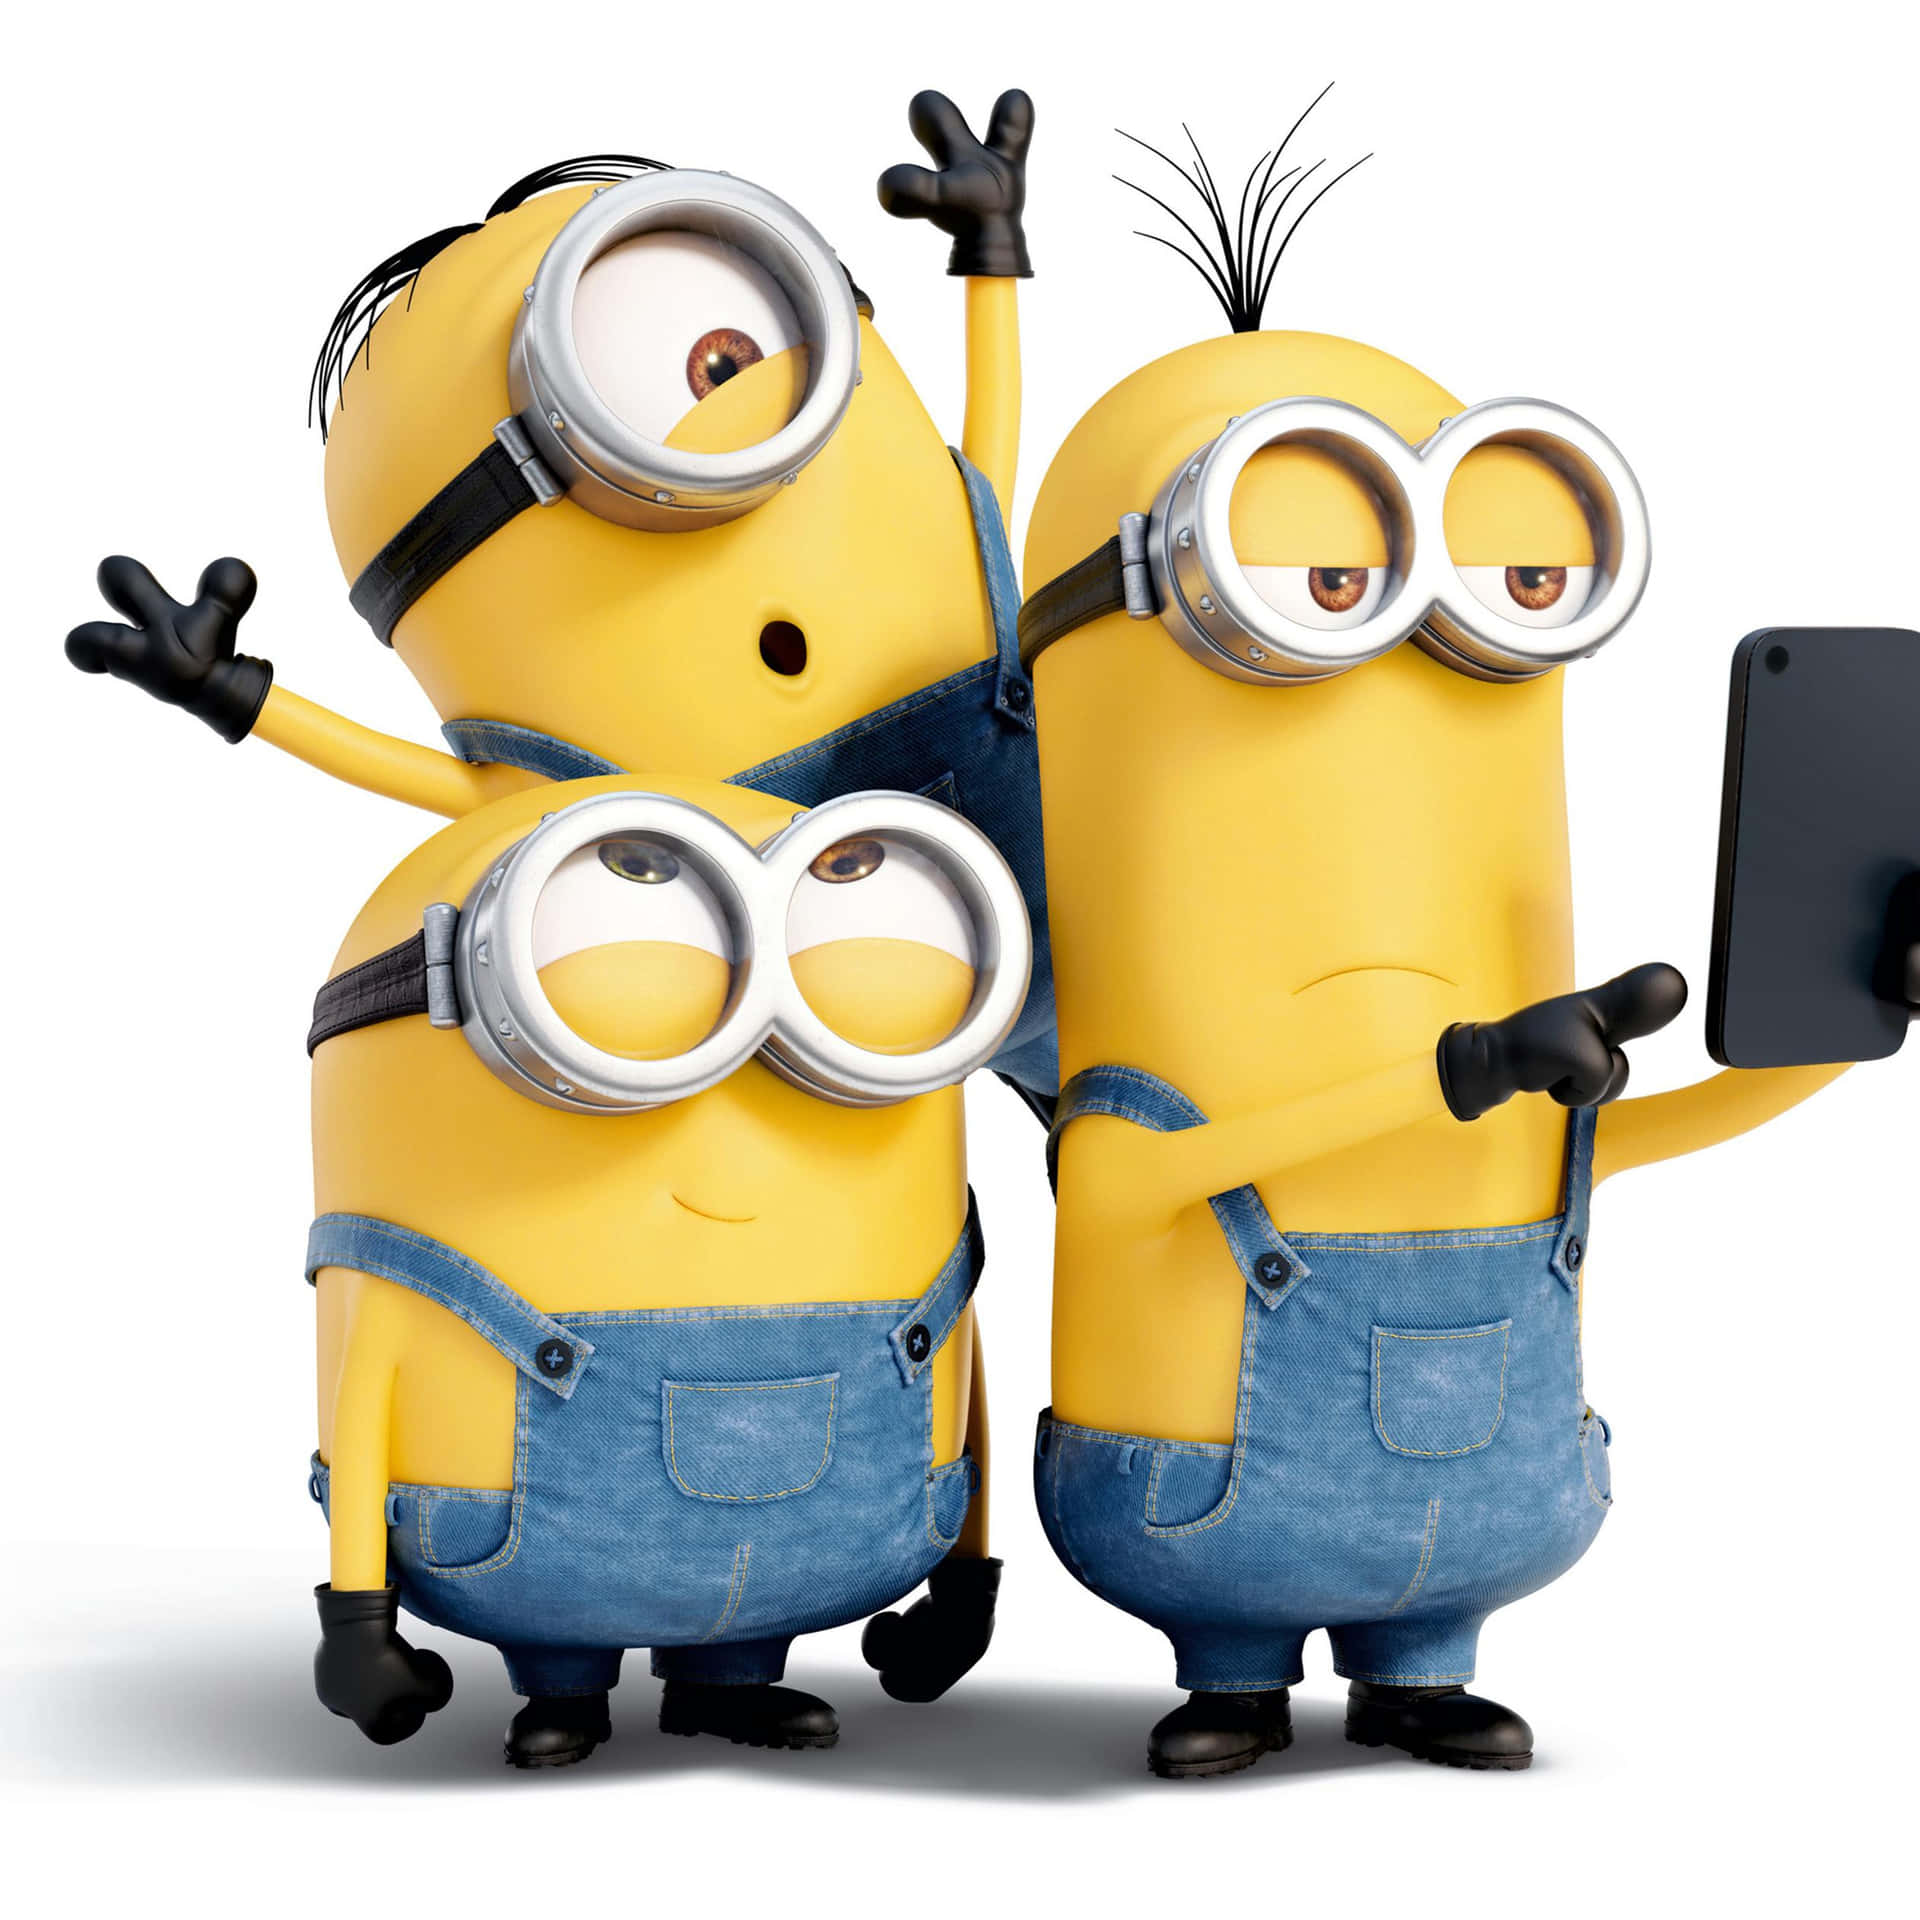 Minions Selfie Funny Cartoon Pictures